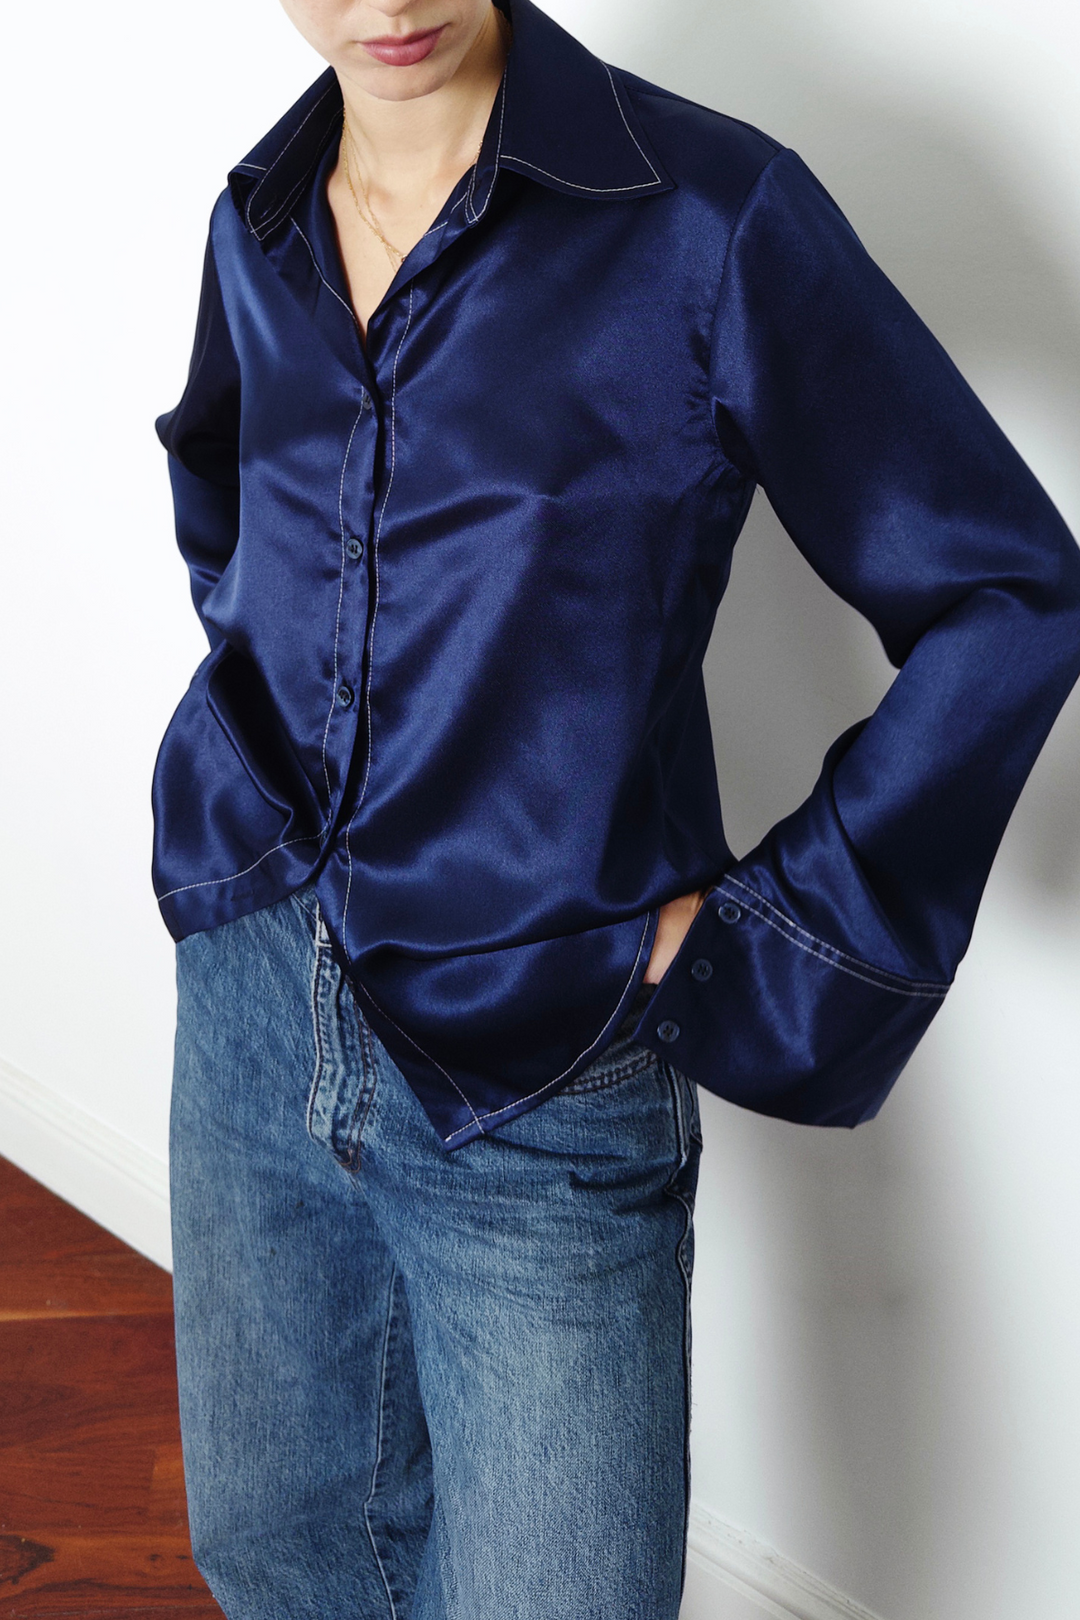 navy silk shirt with white contrast stitching worn in London